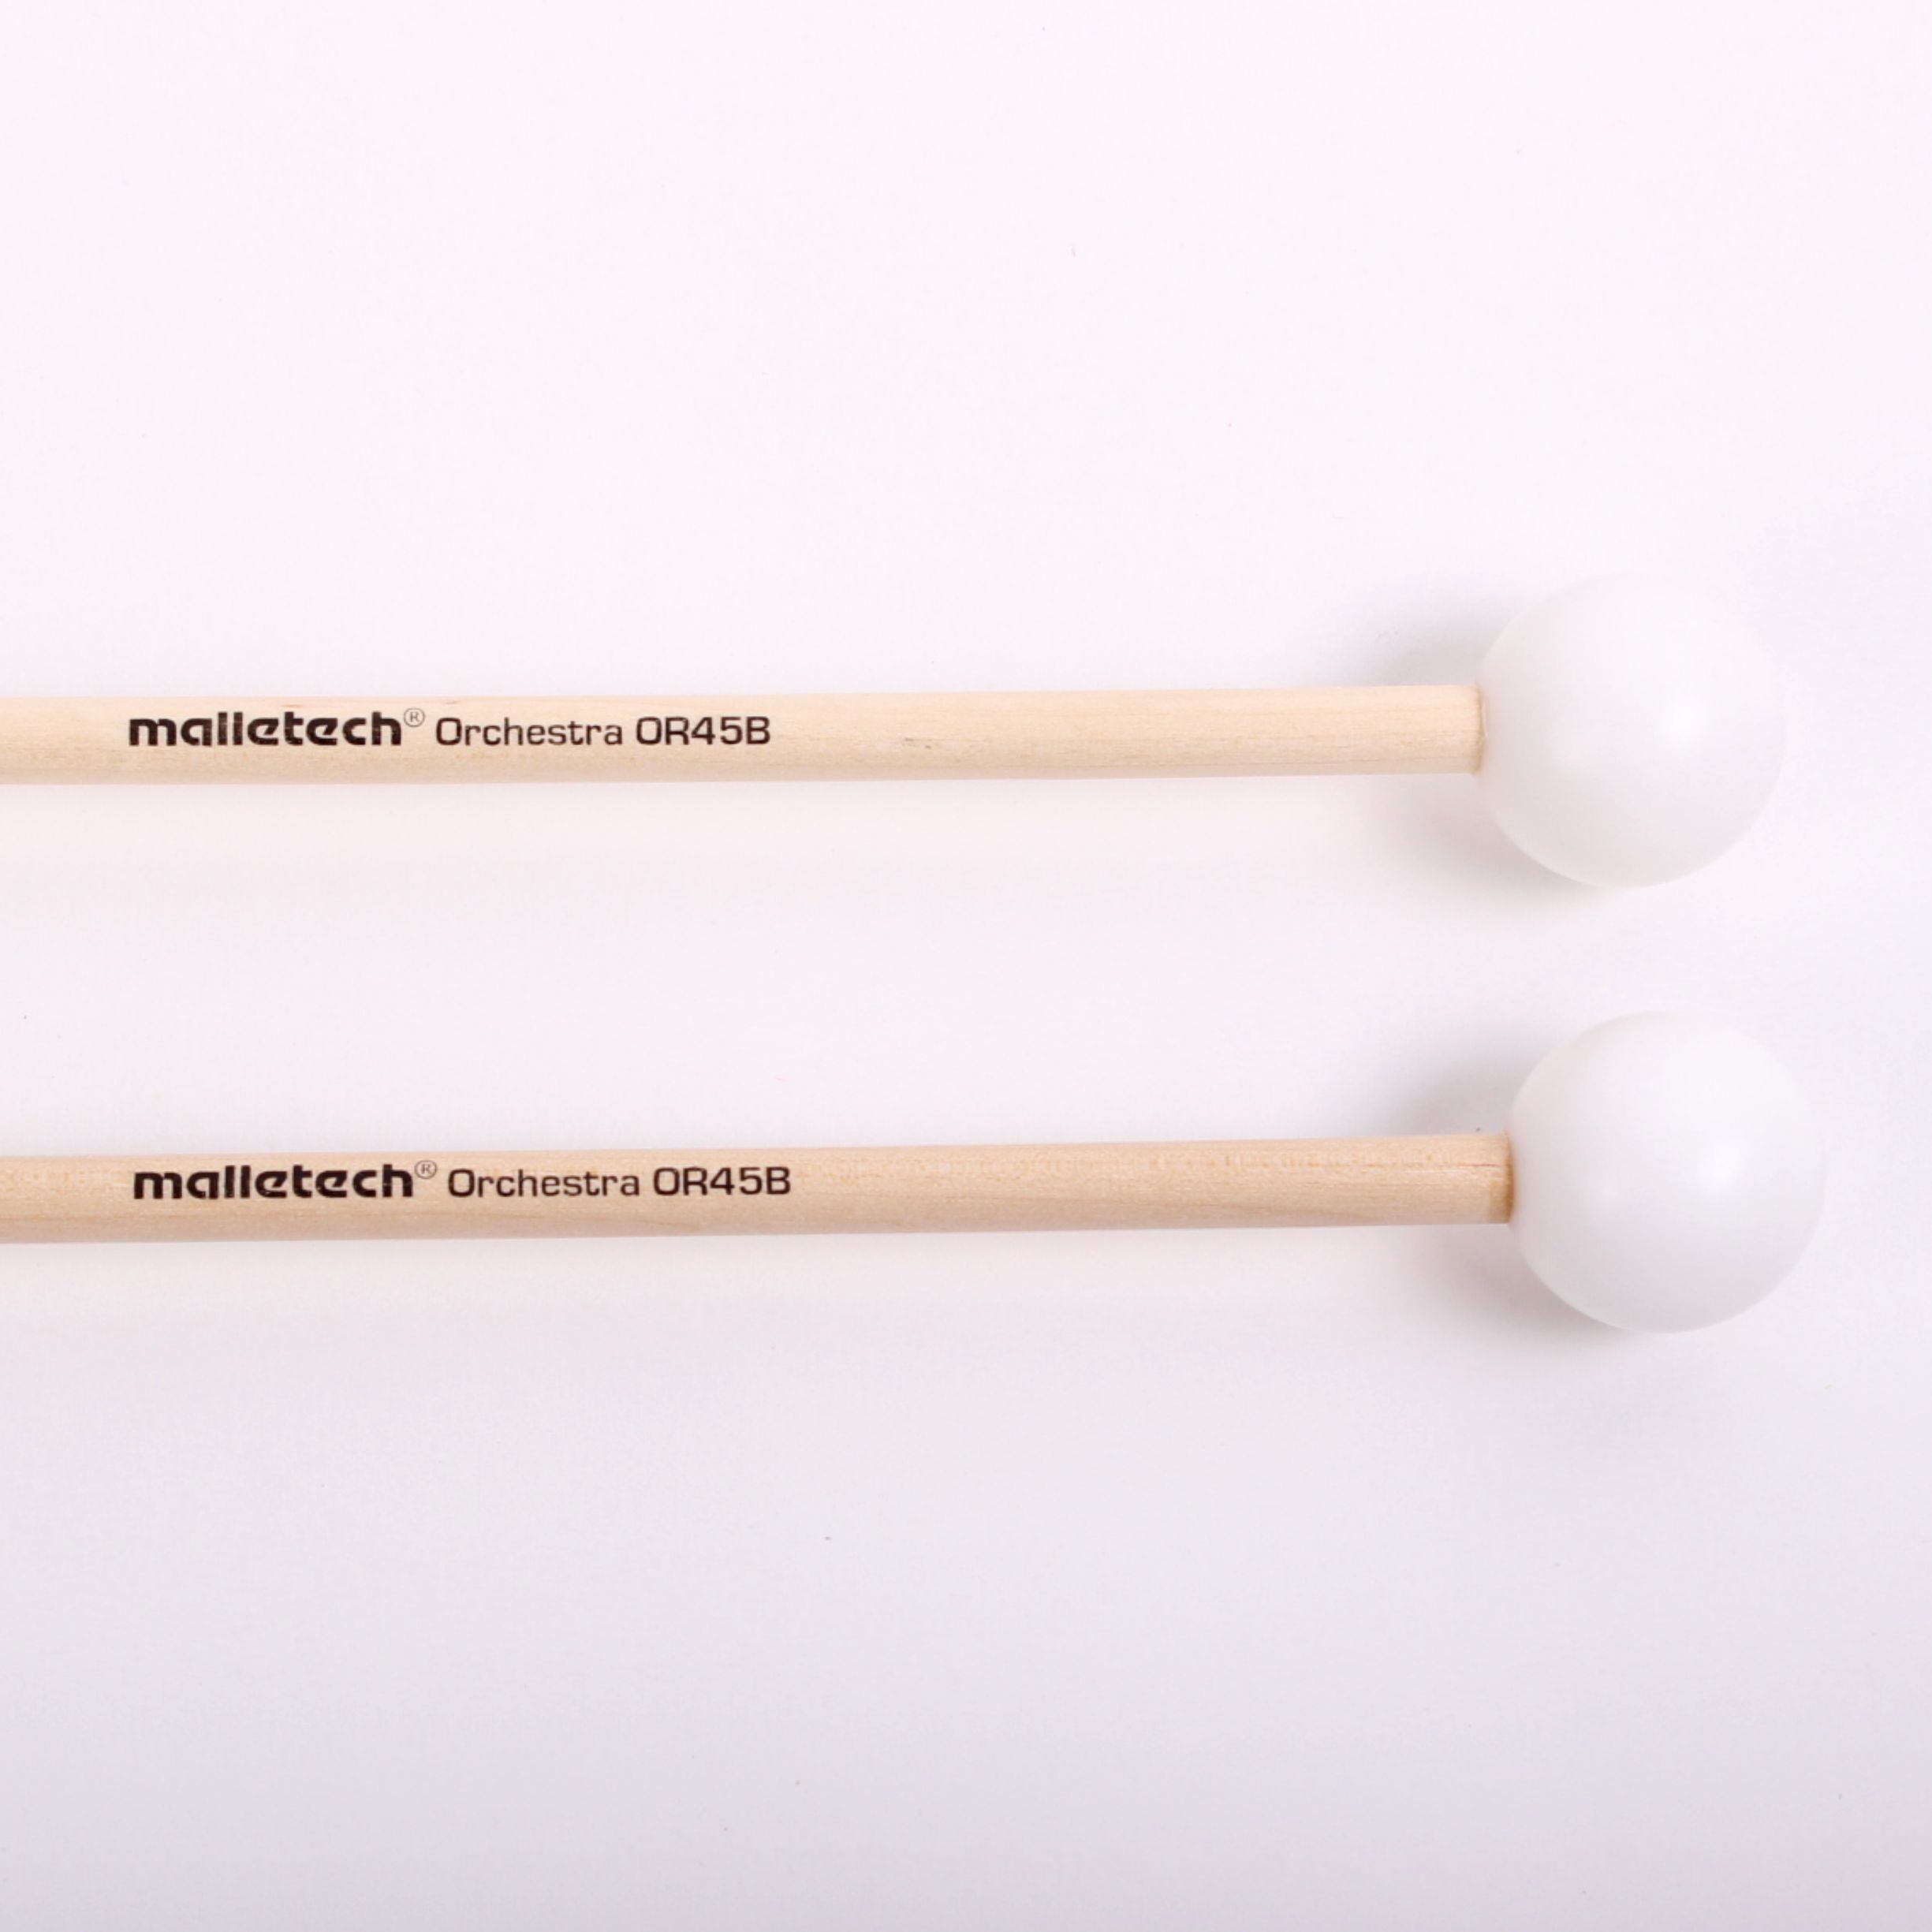 Malletech OR45 Orchestral Series Hard and Heavy Glockenspiel Mallets